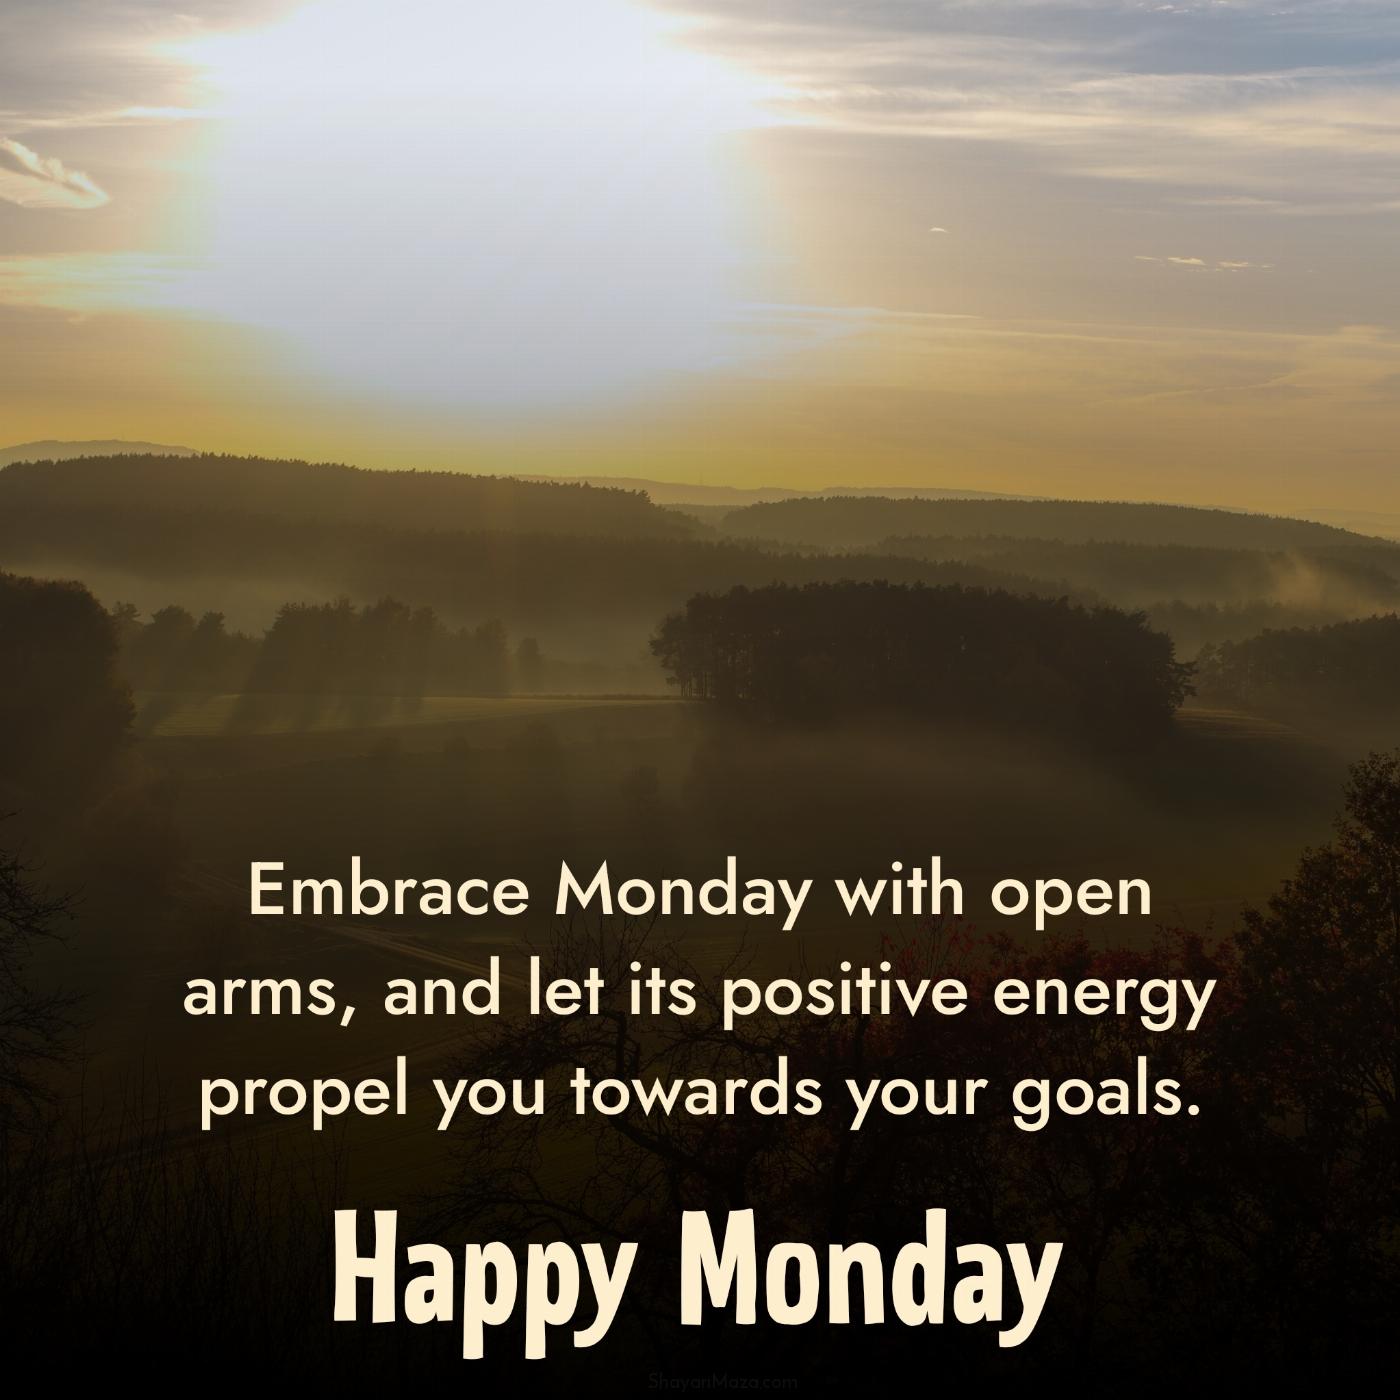 Embrace Monday with open arms and let its positive energy propel